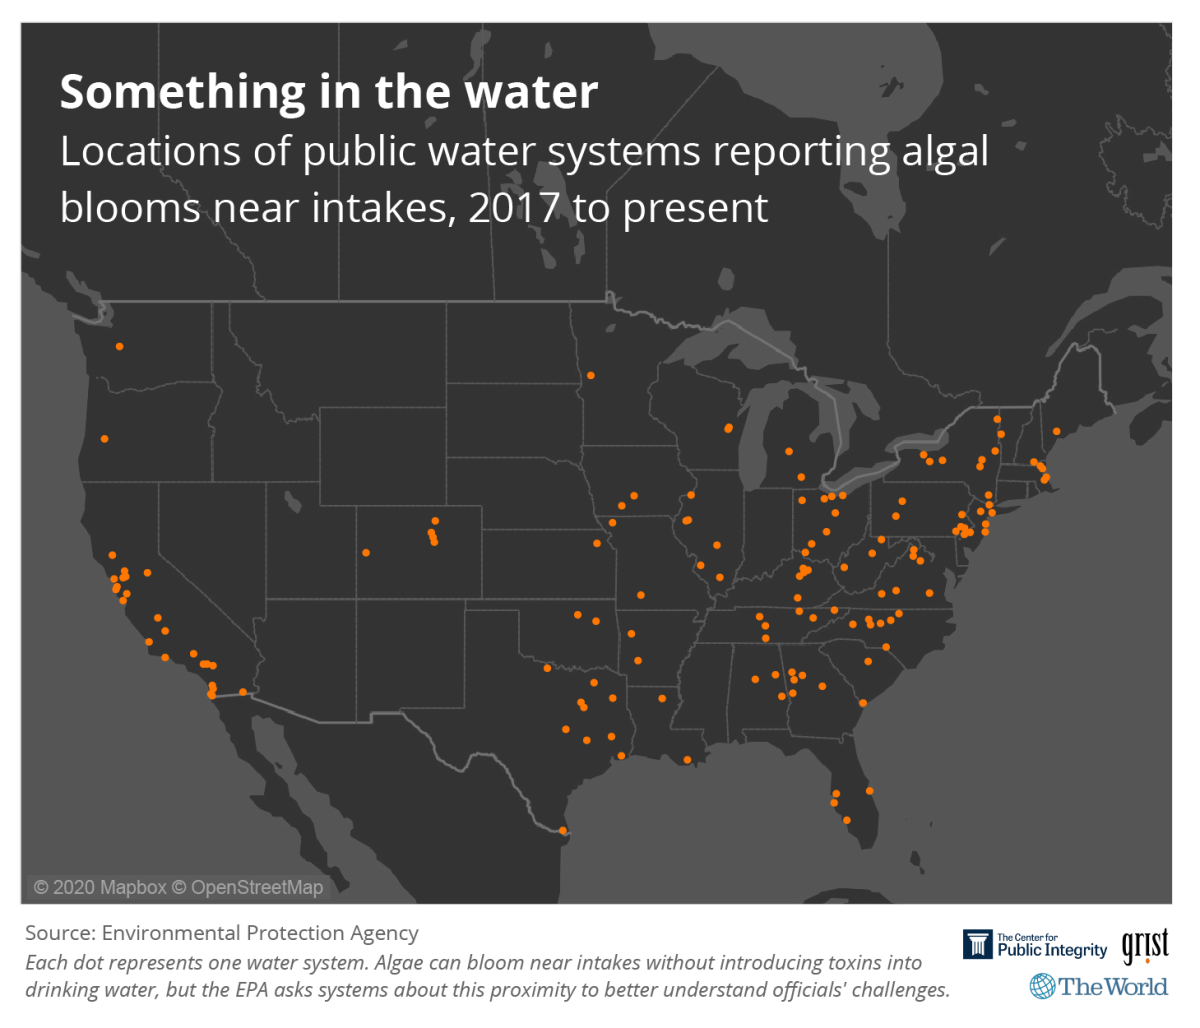 A map showing the locations of public water systems reporting algal blooms near intakes, 2017 to present